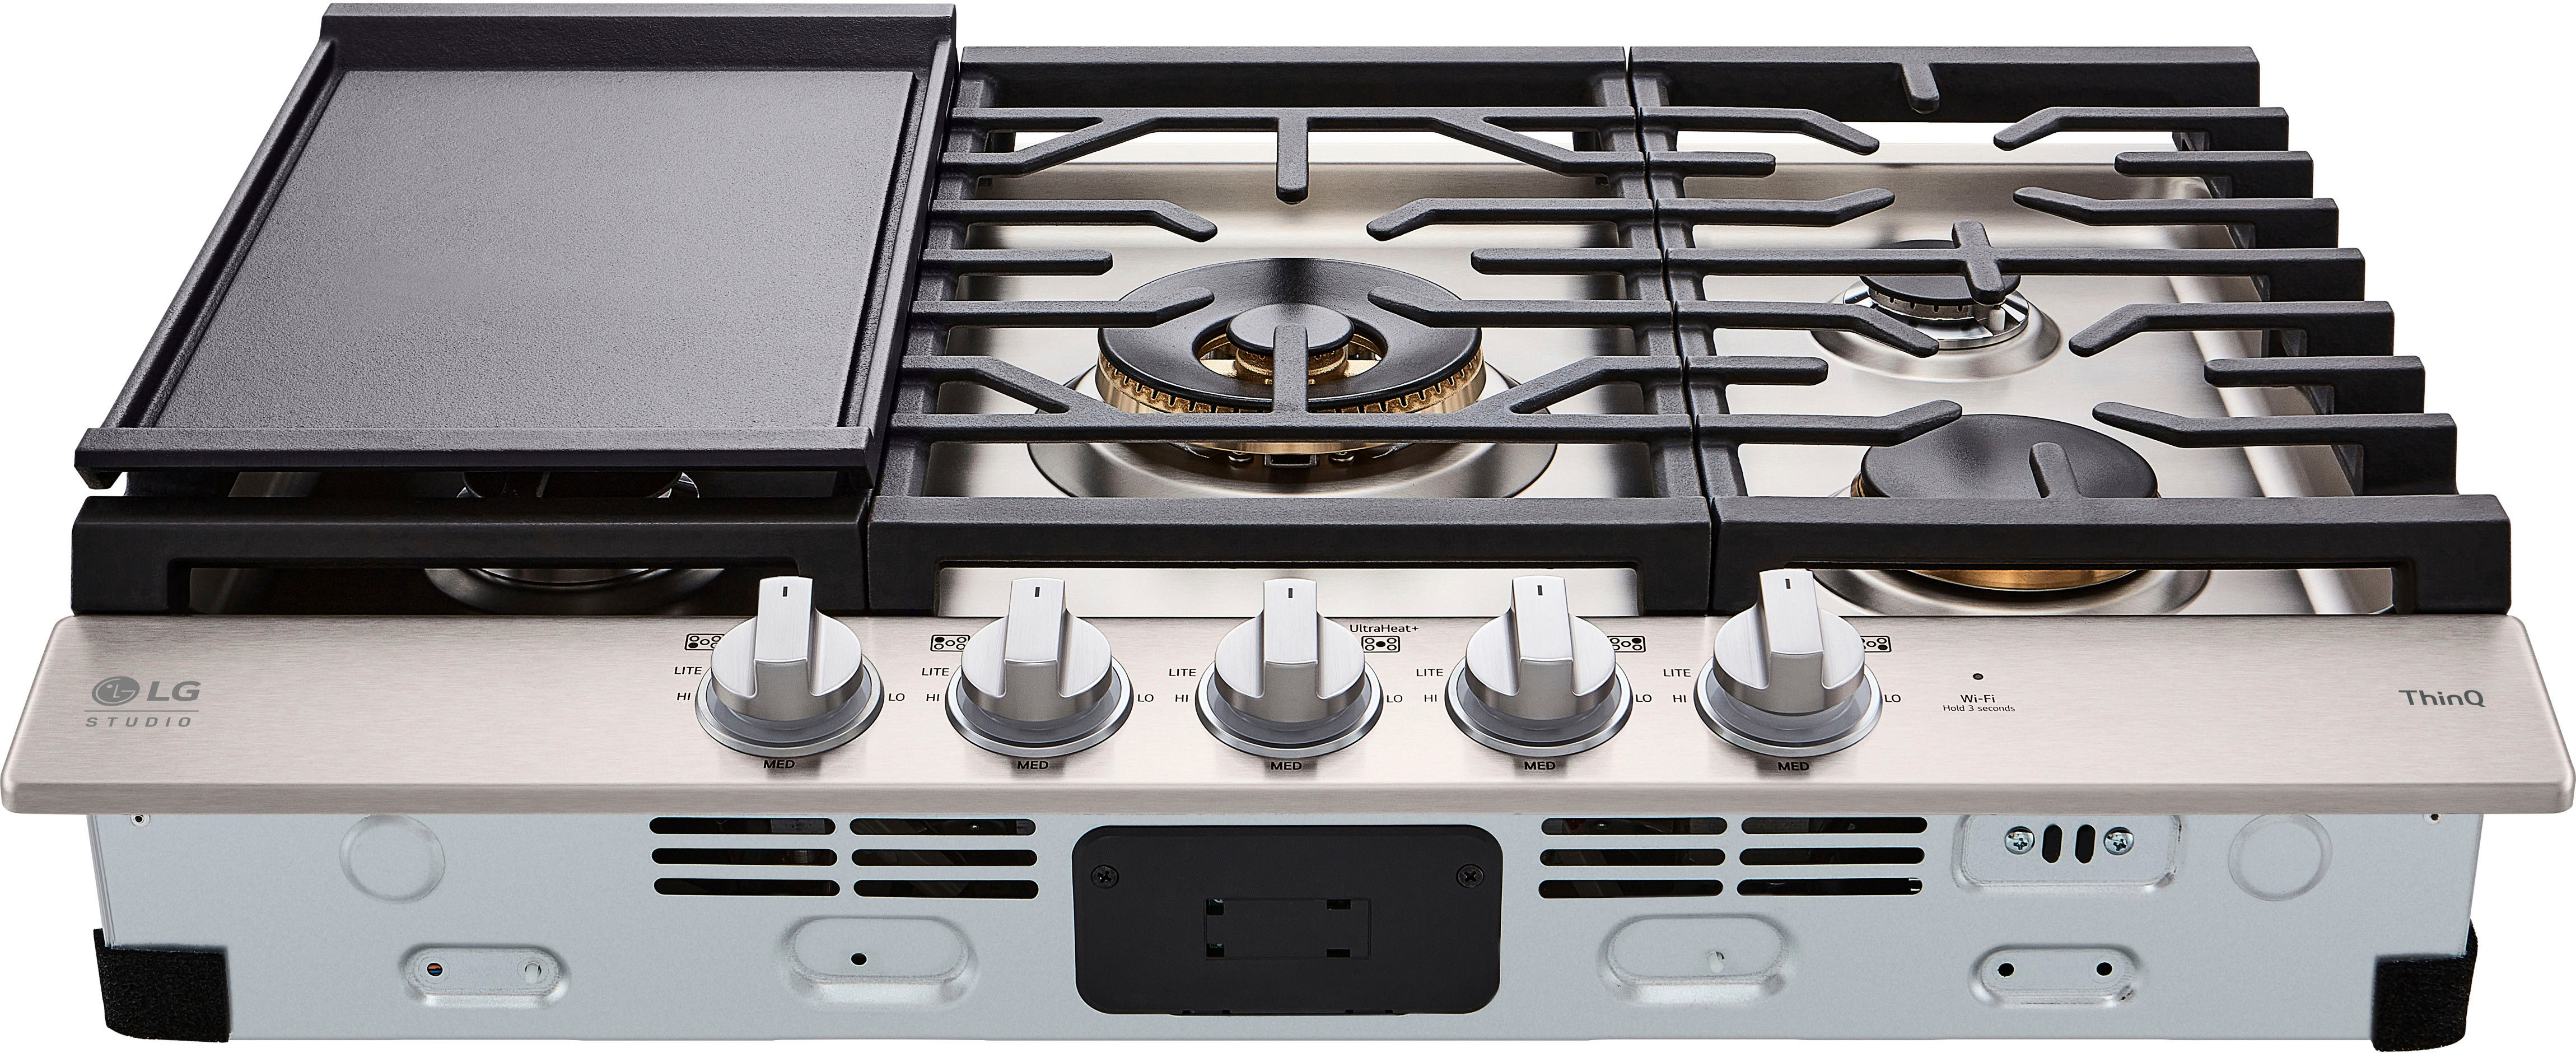 LG 30 Built-In Gas Cooktop with 5 Burners and EasyClean Stainless Steel  CBGJ3023S - Best Buy